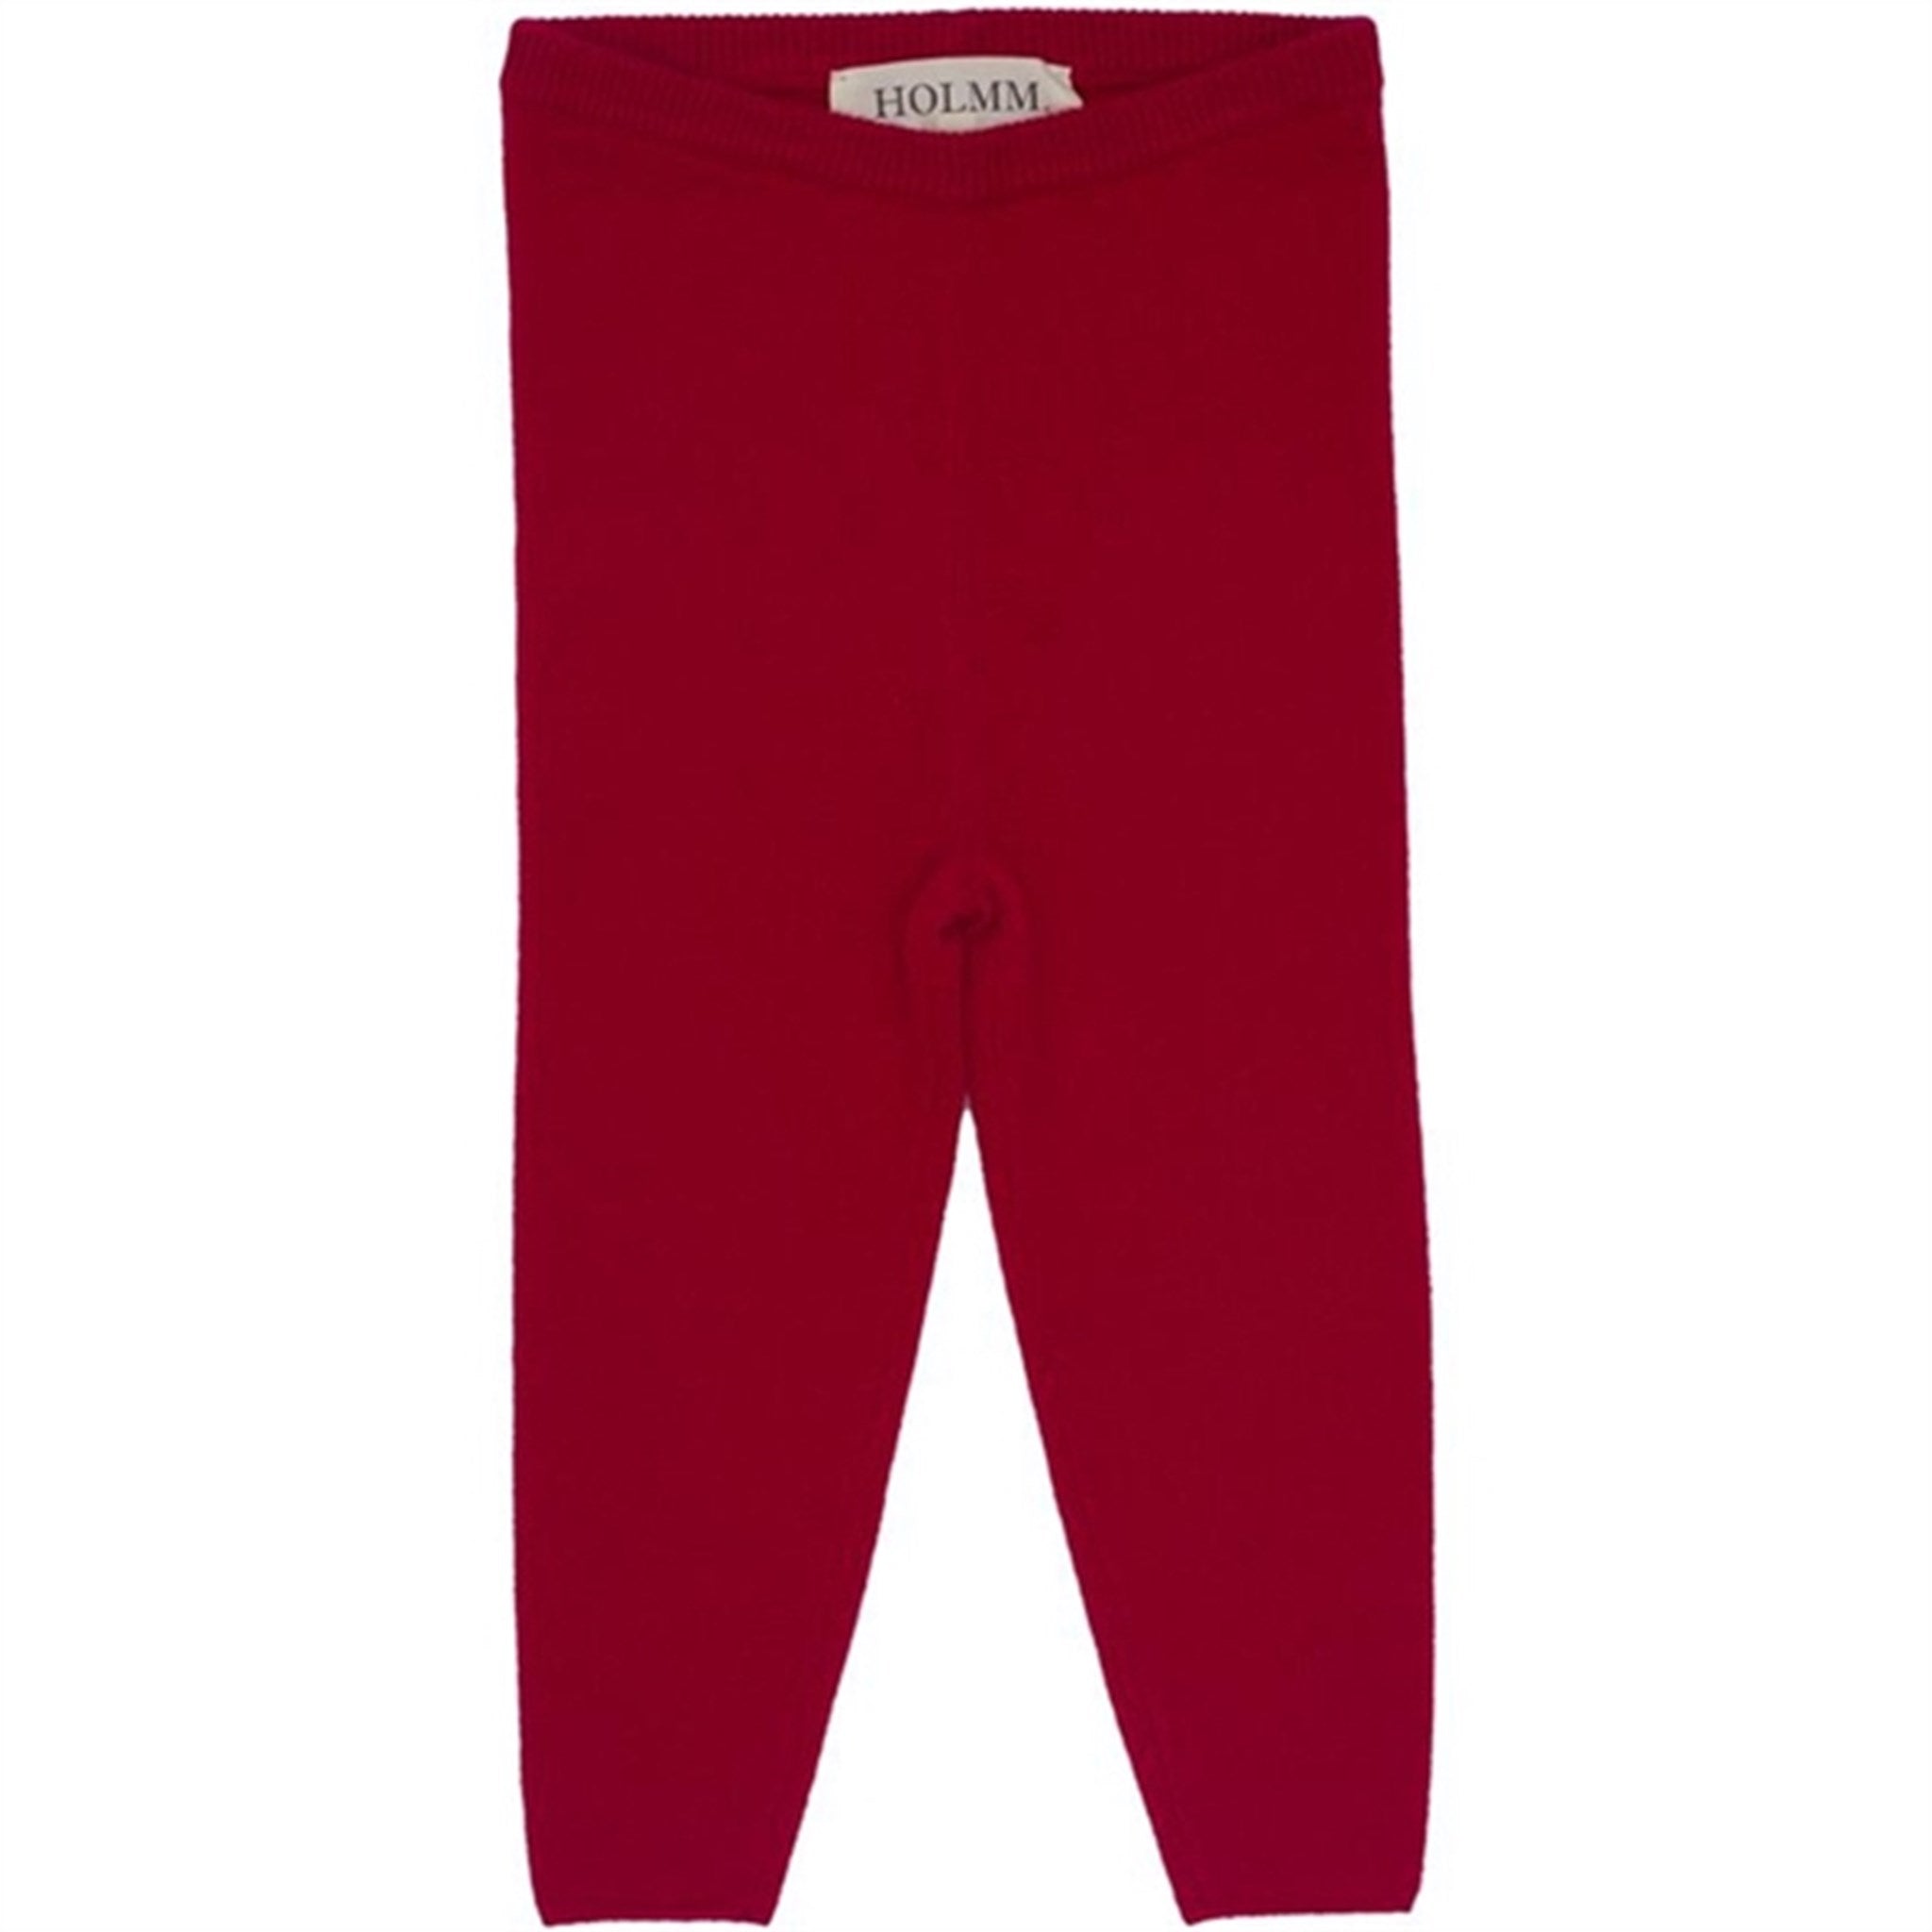 HOLMM Postbox Bailey Cashmere Knit Leggings